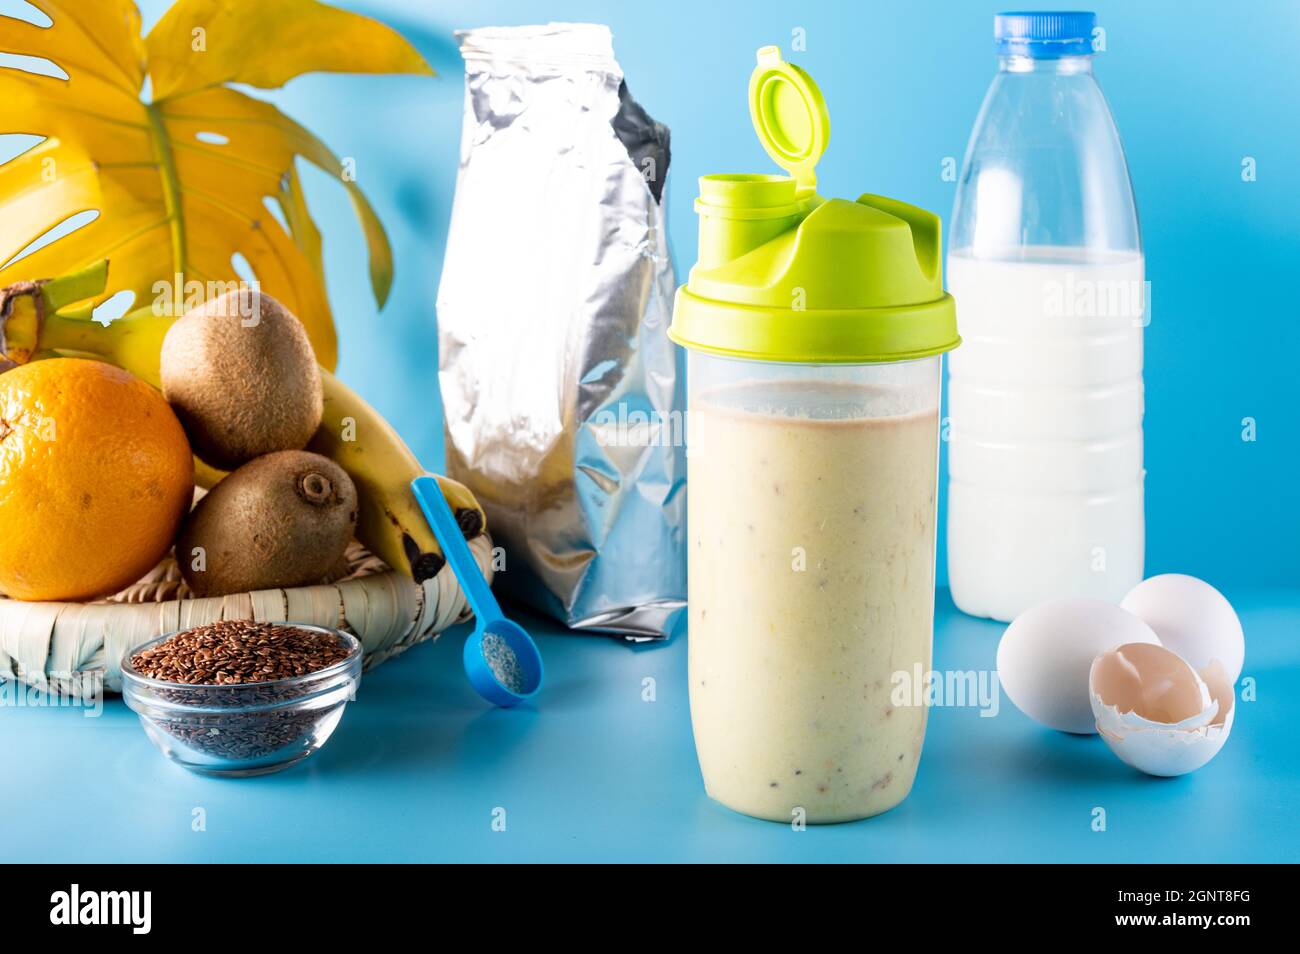 Protein powder and fruit. Protein and milk packaging. Milk products. Protein drink in a shaker. Fruit and protein. Stock Photo